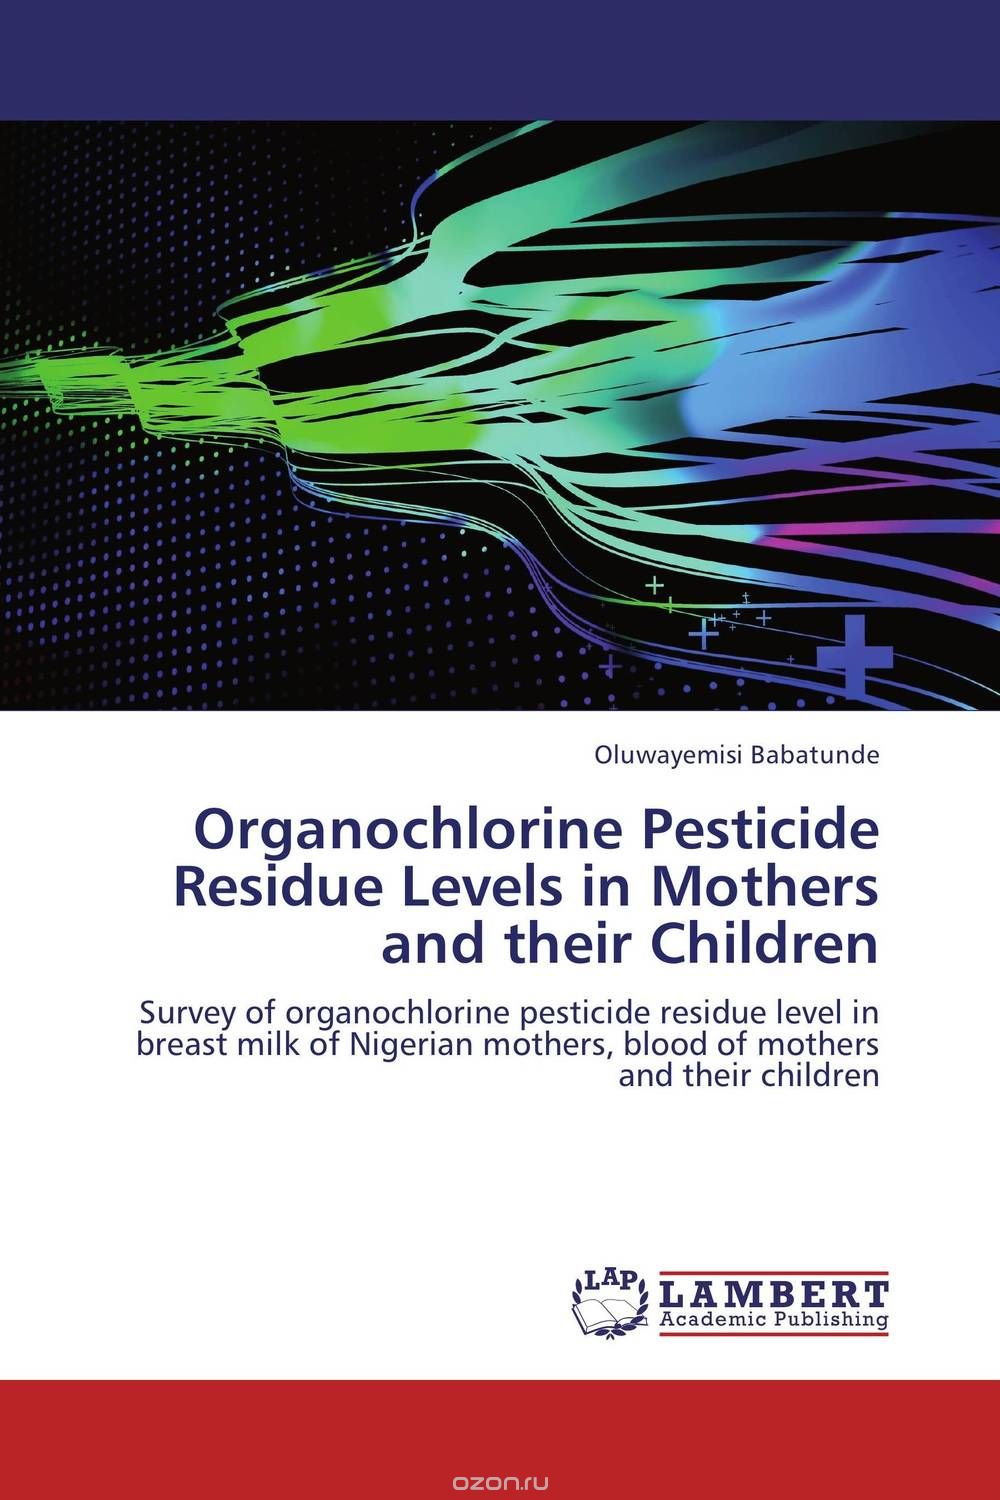 Organochlorine Pesticide Residue Levels in Mothers and their Children